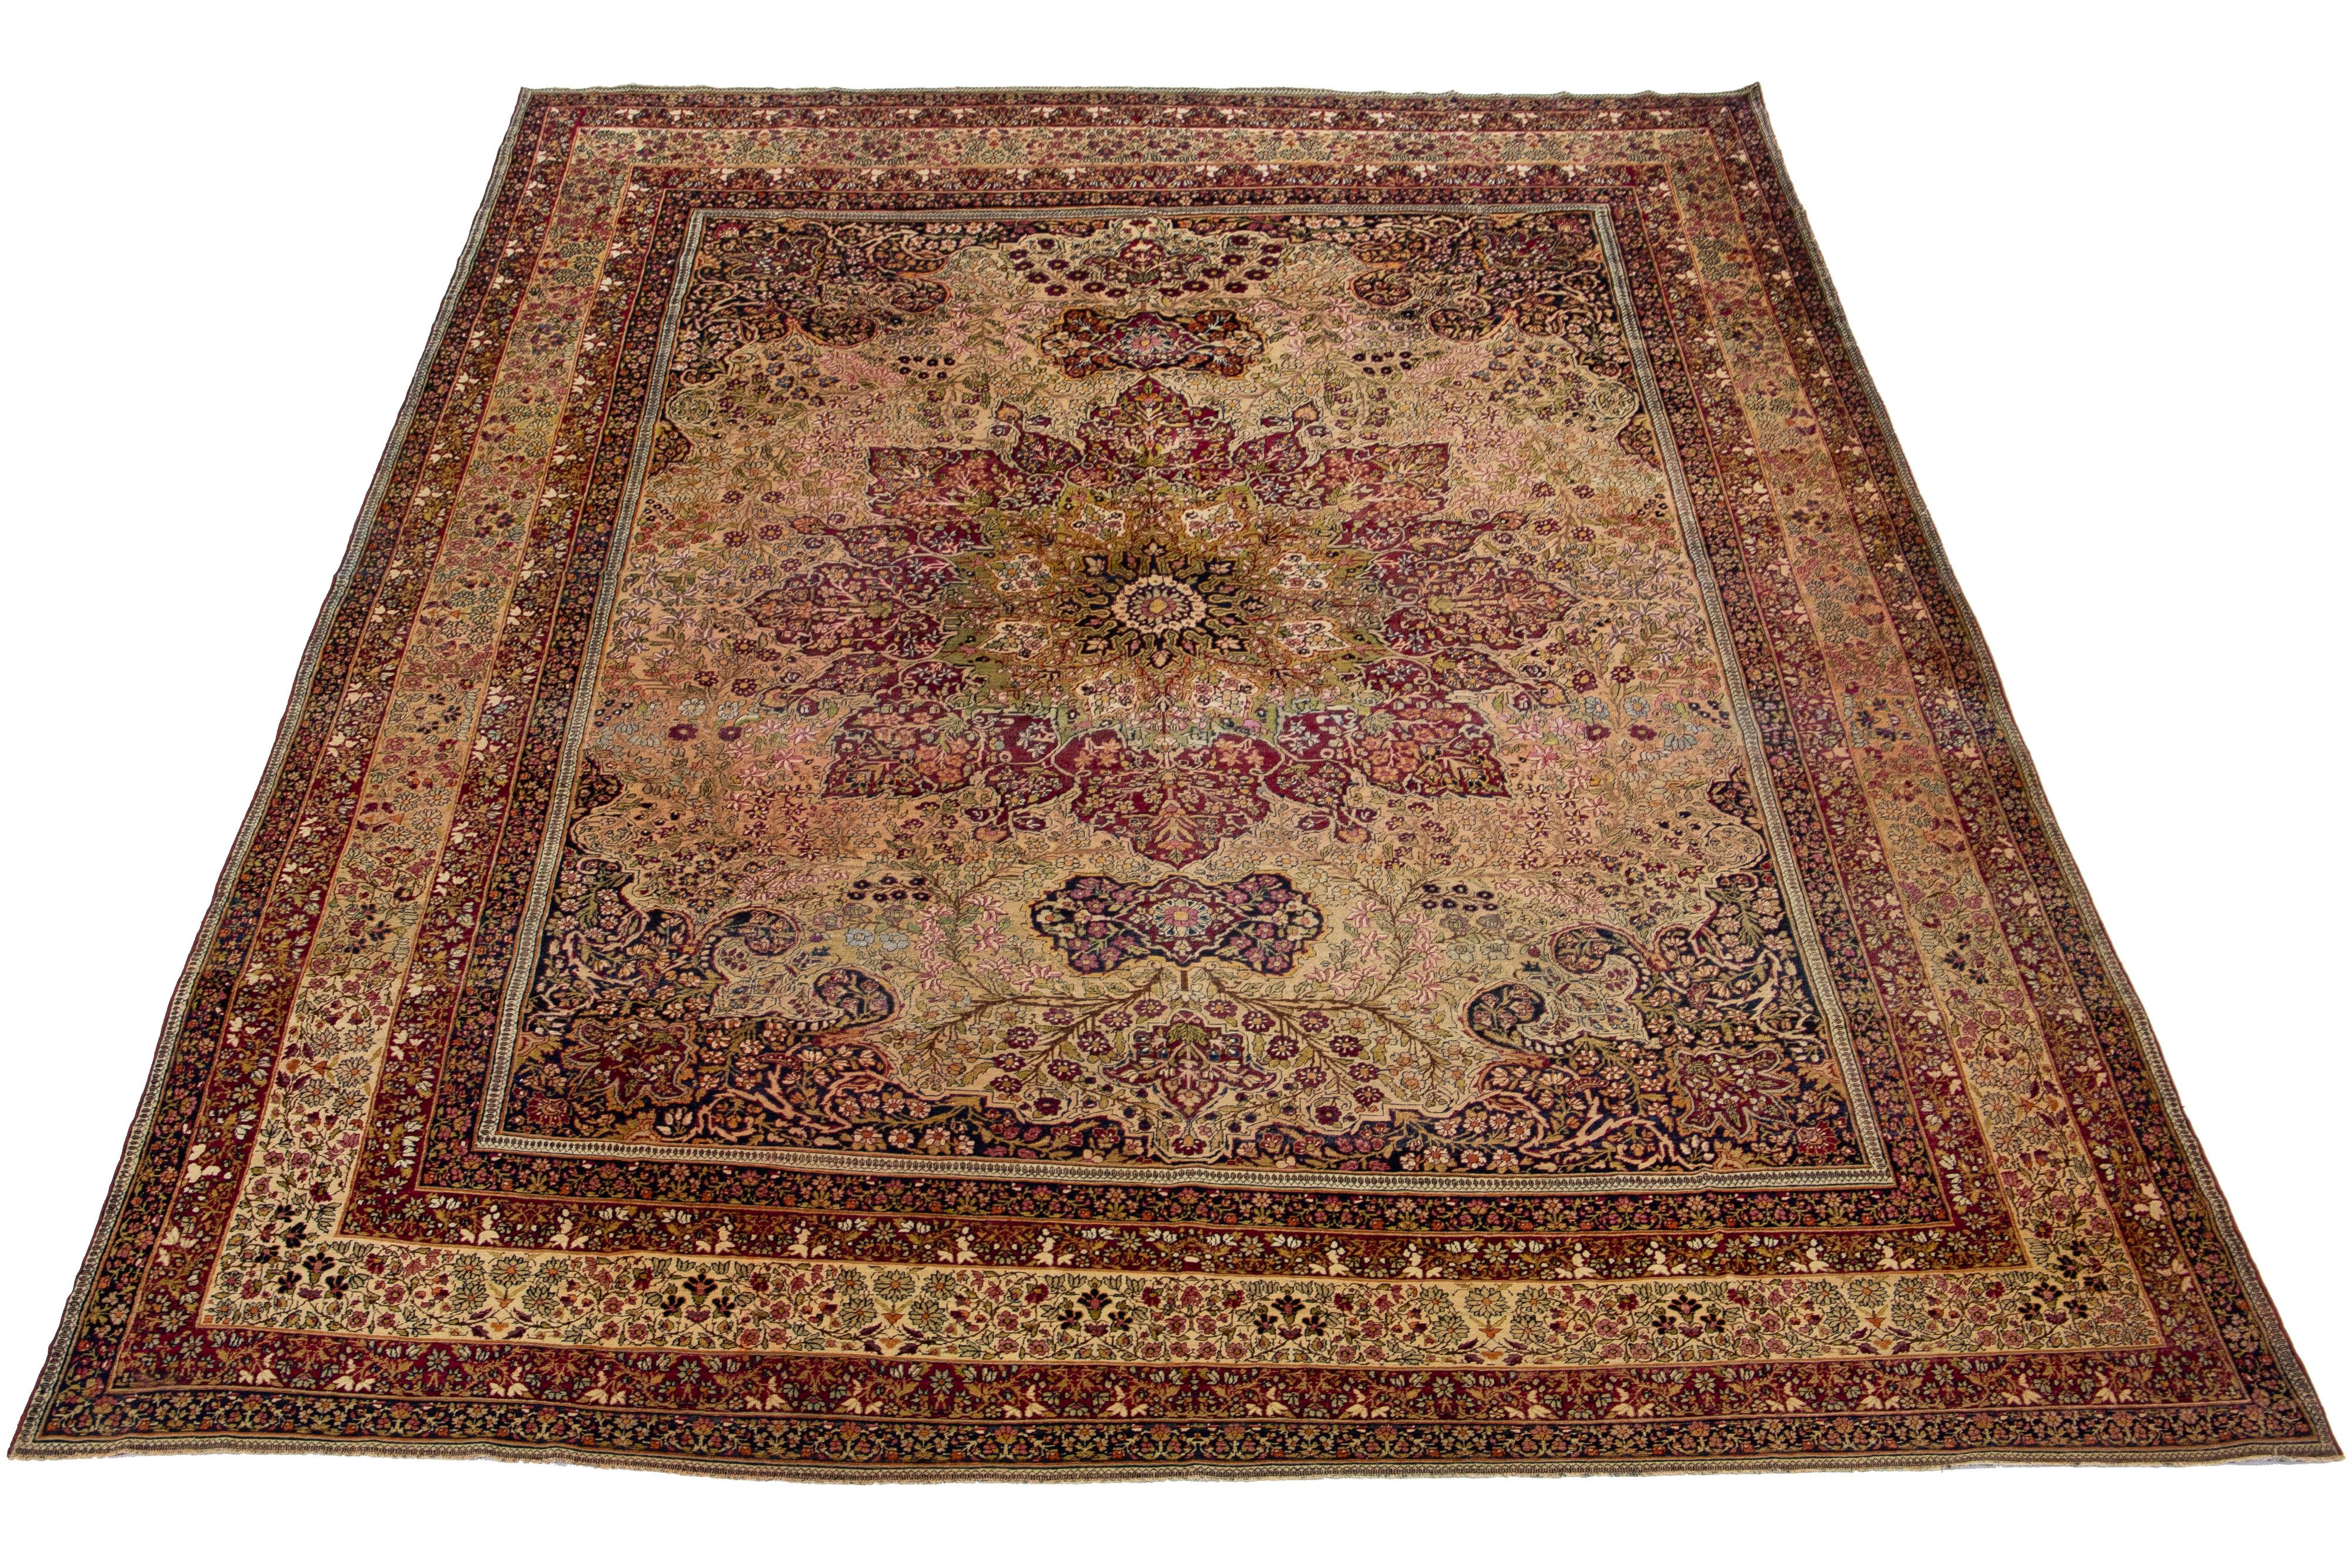 This Persian Kerman wool rug from the late 19th century showcases a meticulously crafted allover floral design in peach, green, and goldenrod. This antique rug features a raspberry red field.

This rug measures 9'8